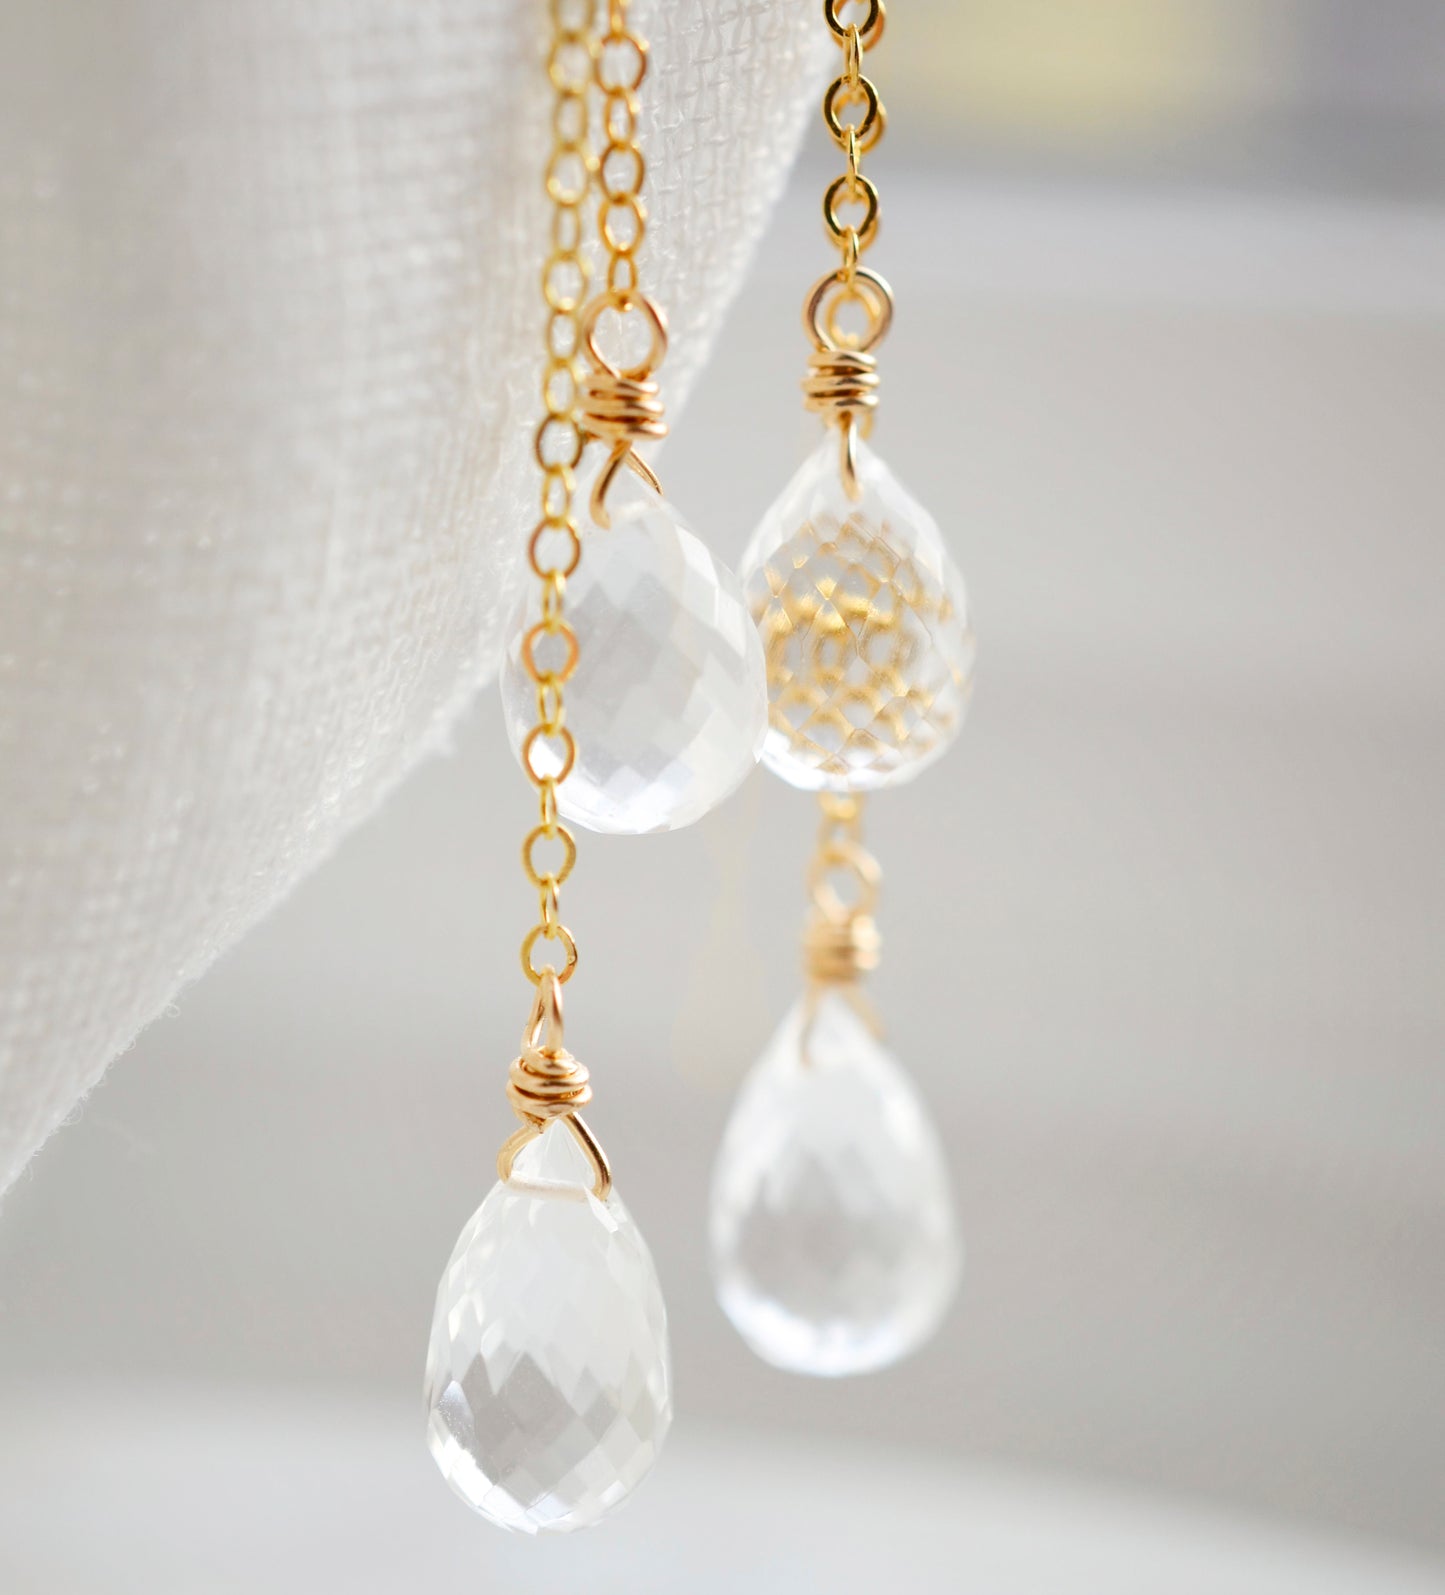 Long clear crystal quartz earrings with two teardrop dangles hanging from a dainty 14k gold filled chain. Close up of gemstones.